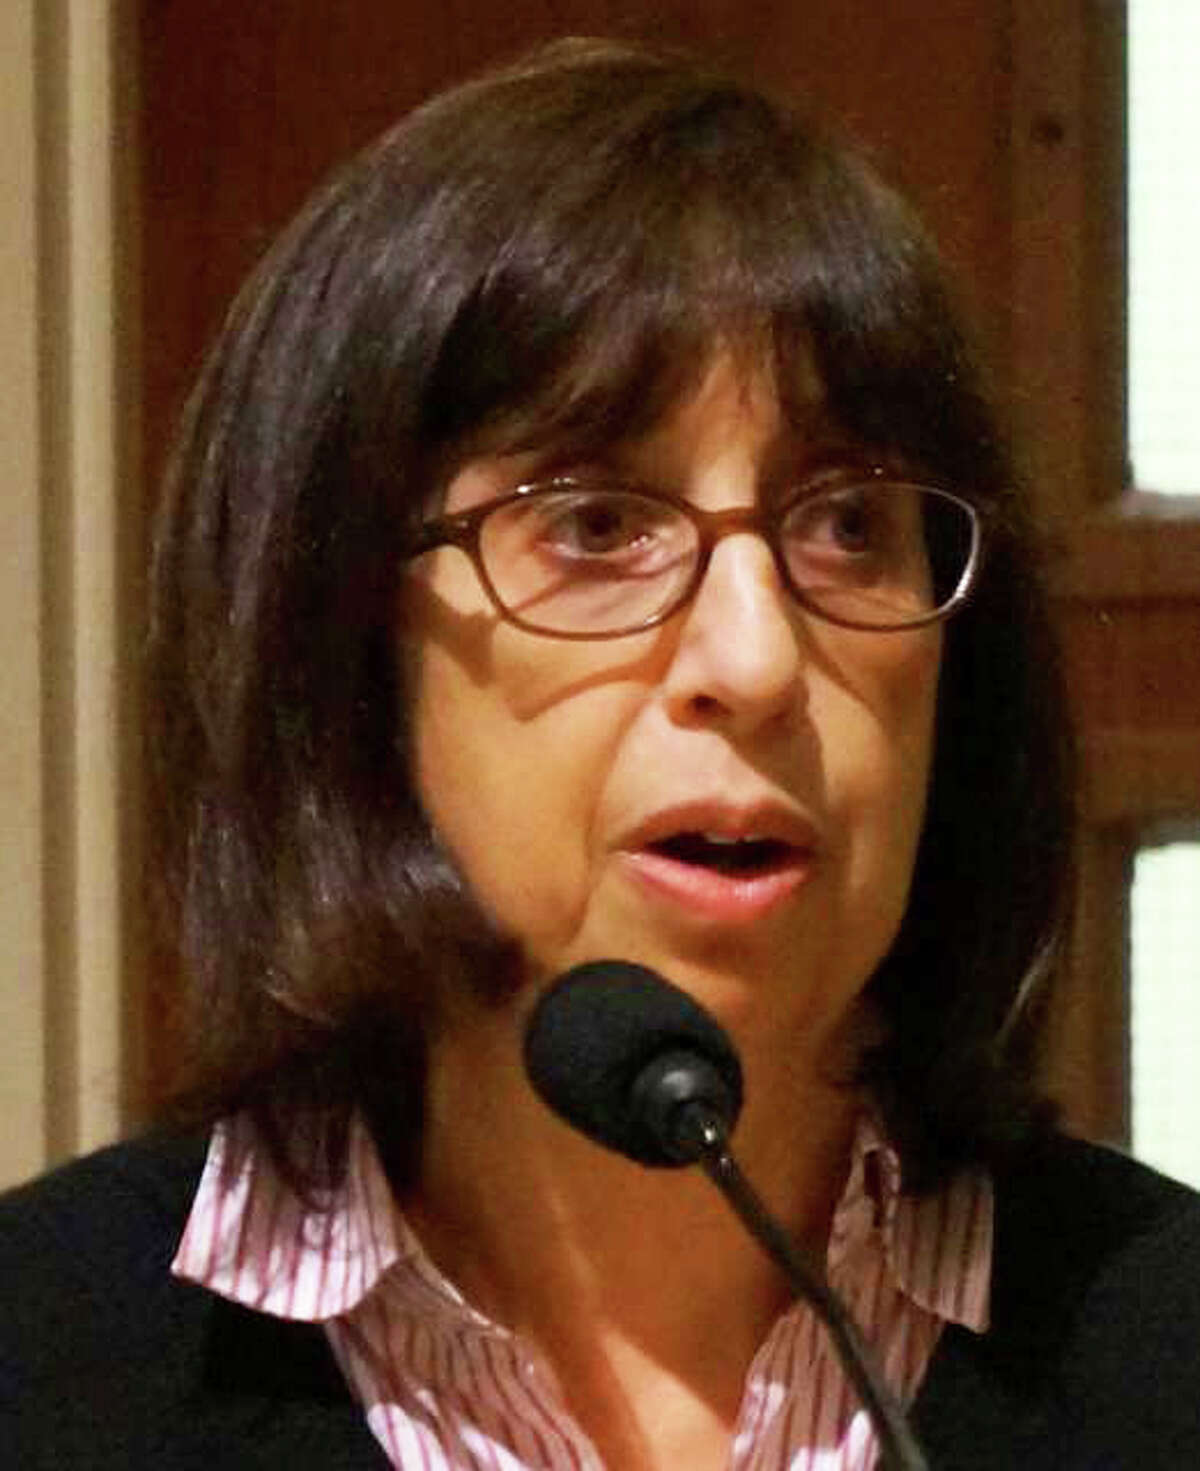 Former Selectman Shelly Kassen, shown here addressing a 2012 session of the Representative Town Meeting, has been elected the president of the Washington Institute for Near East Policy.